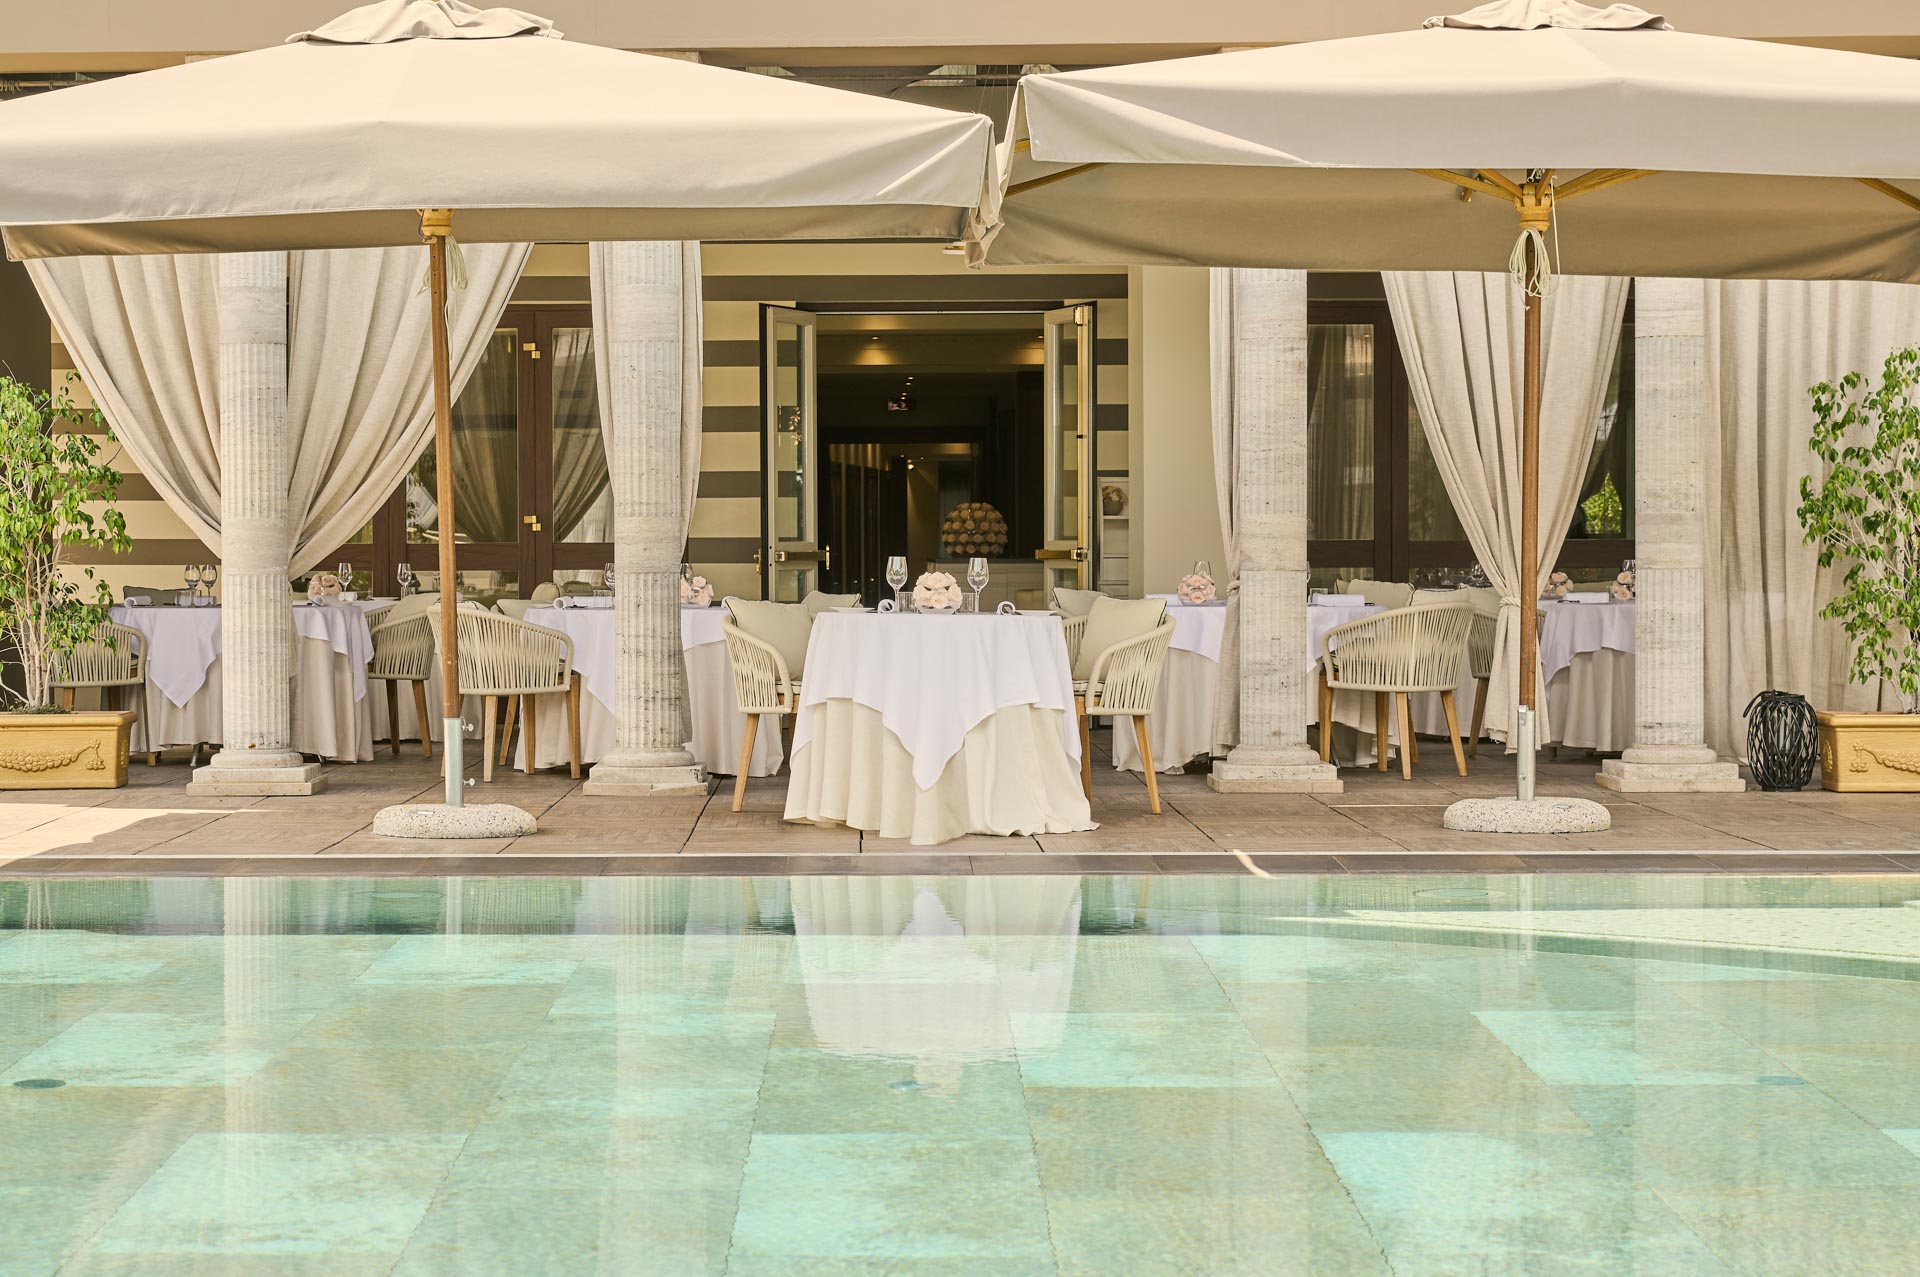 Dining on the terrace poolside